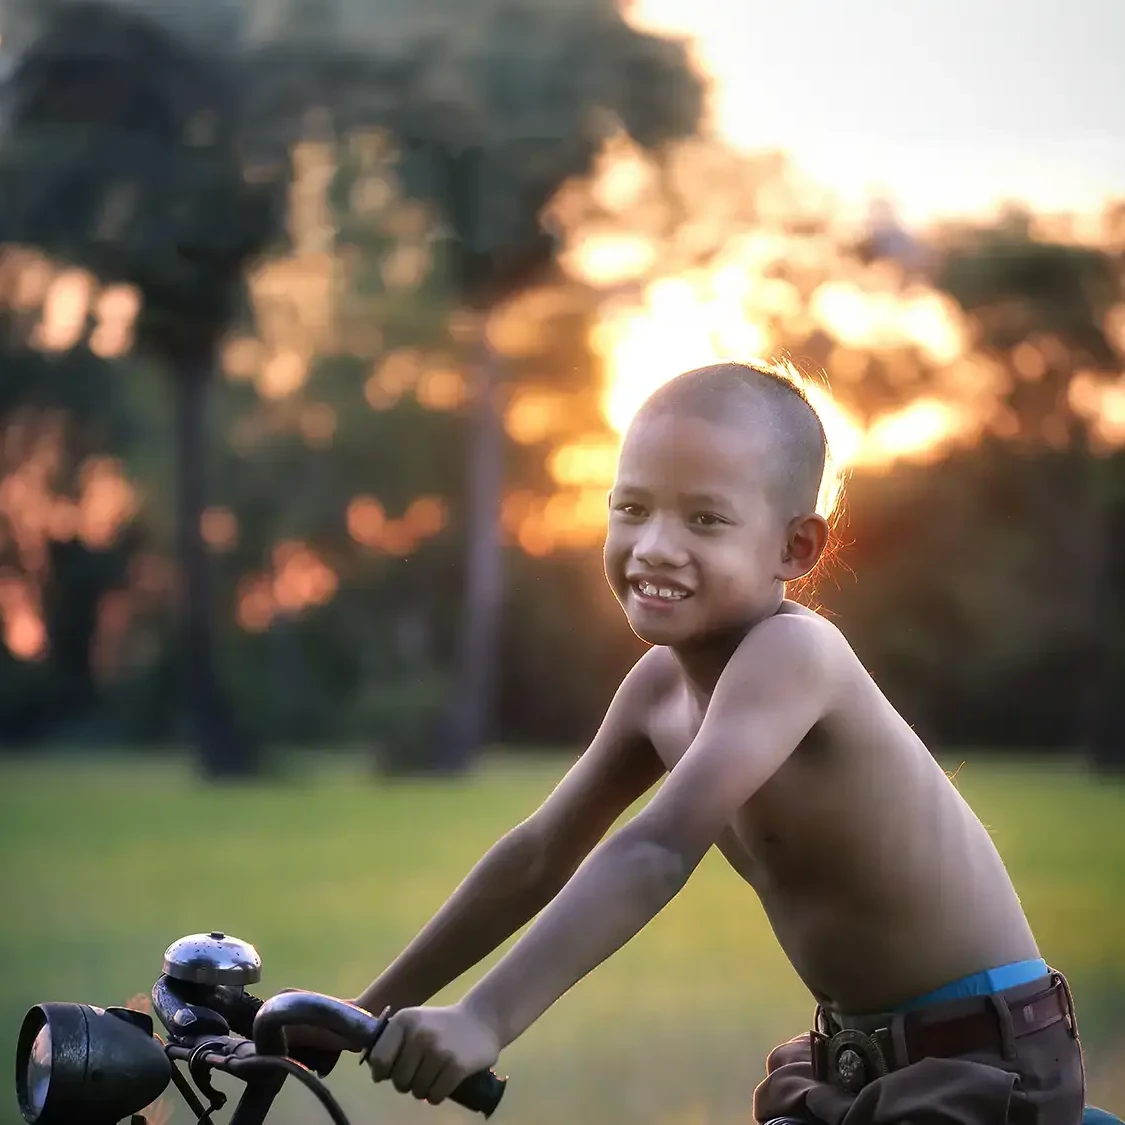 Child smiling on bike at sunset after he received a bike from the Charity Bike Build team building event